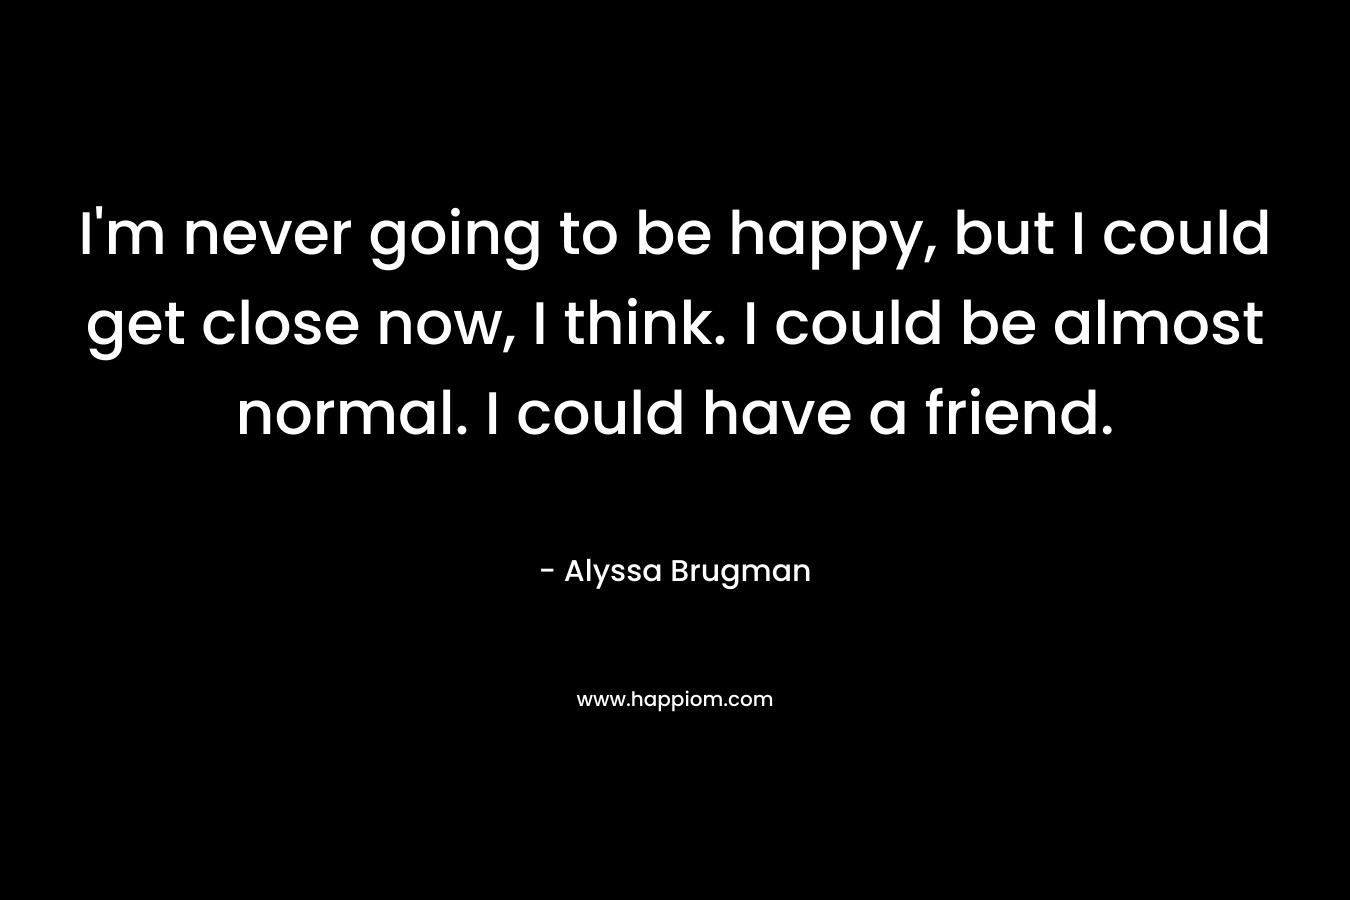 I'm never going to be happy, but I could get close now, I think. I could be almost normal. I could have a friend.